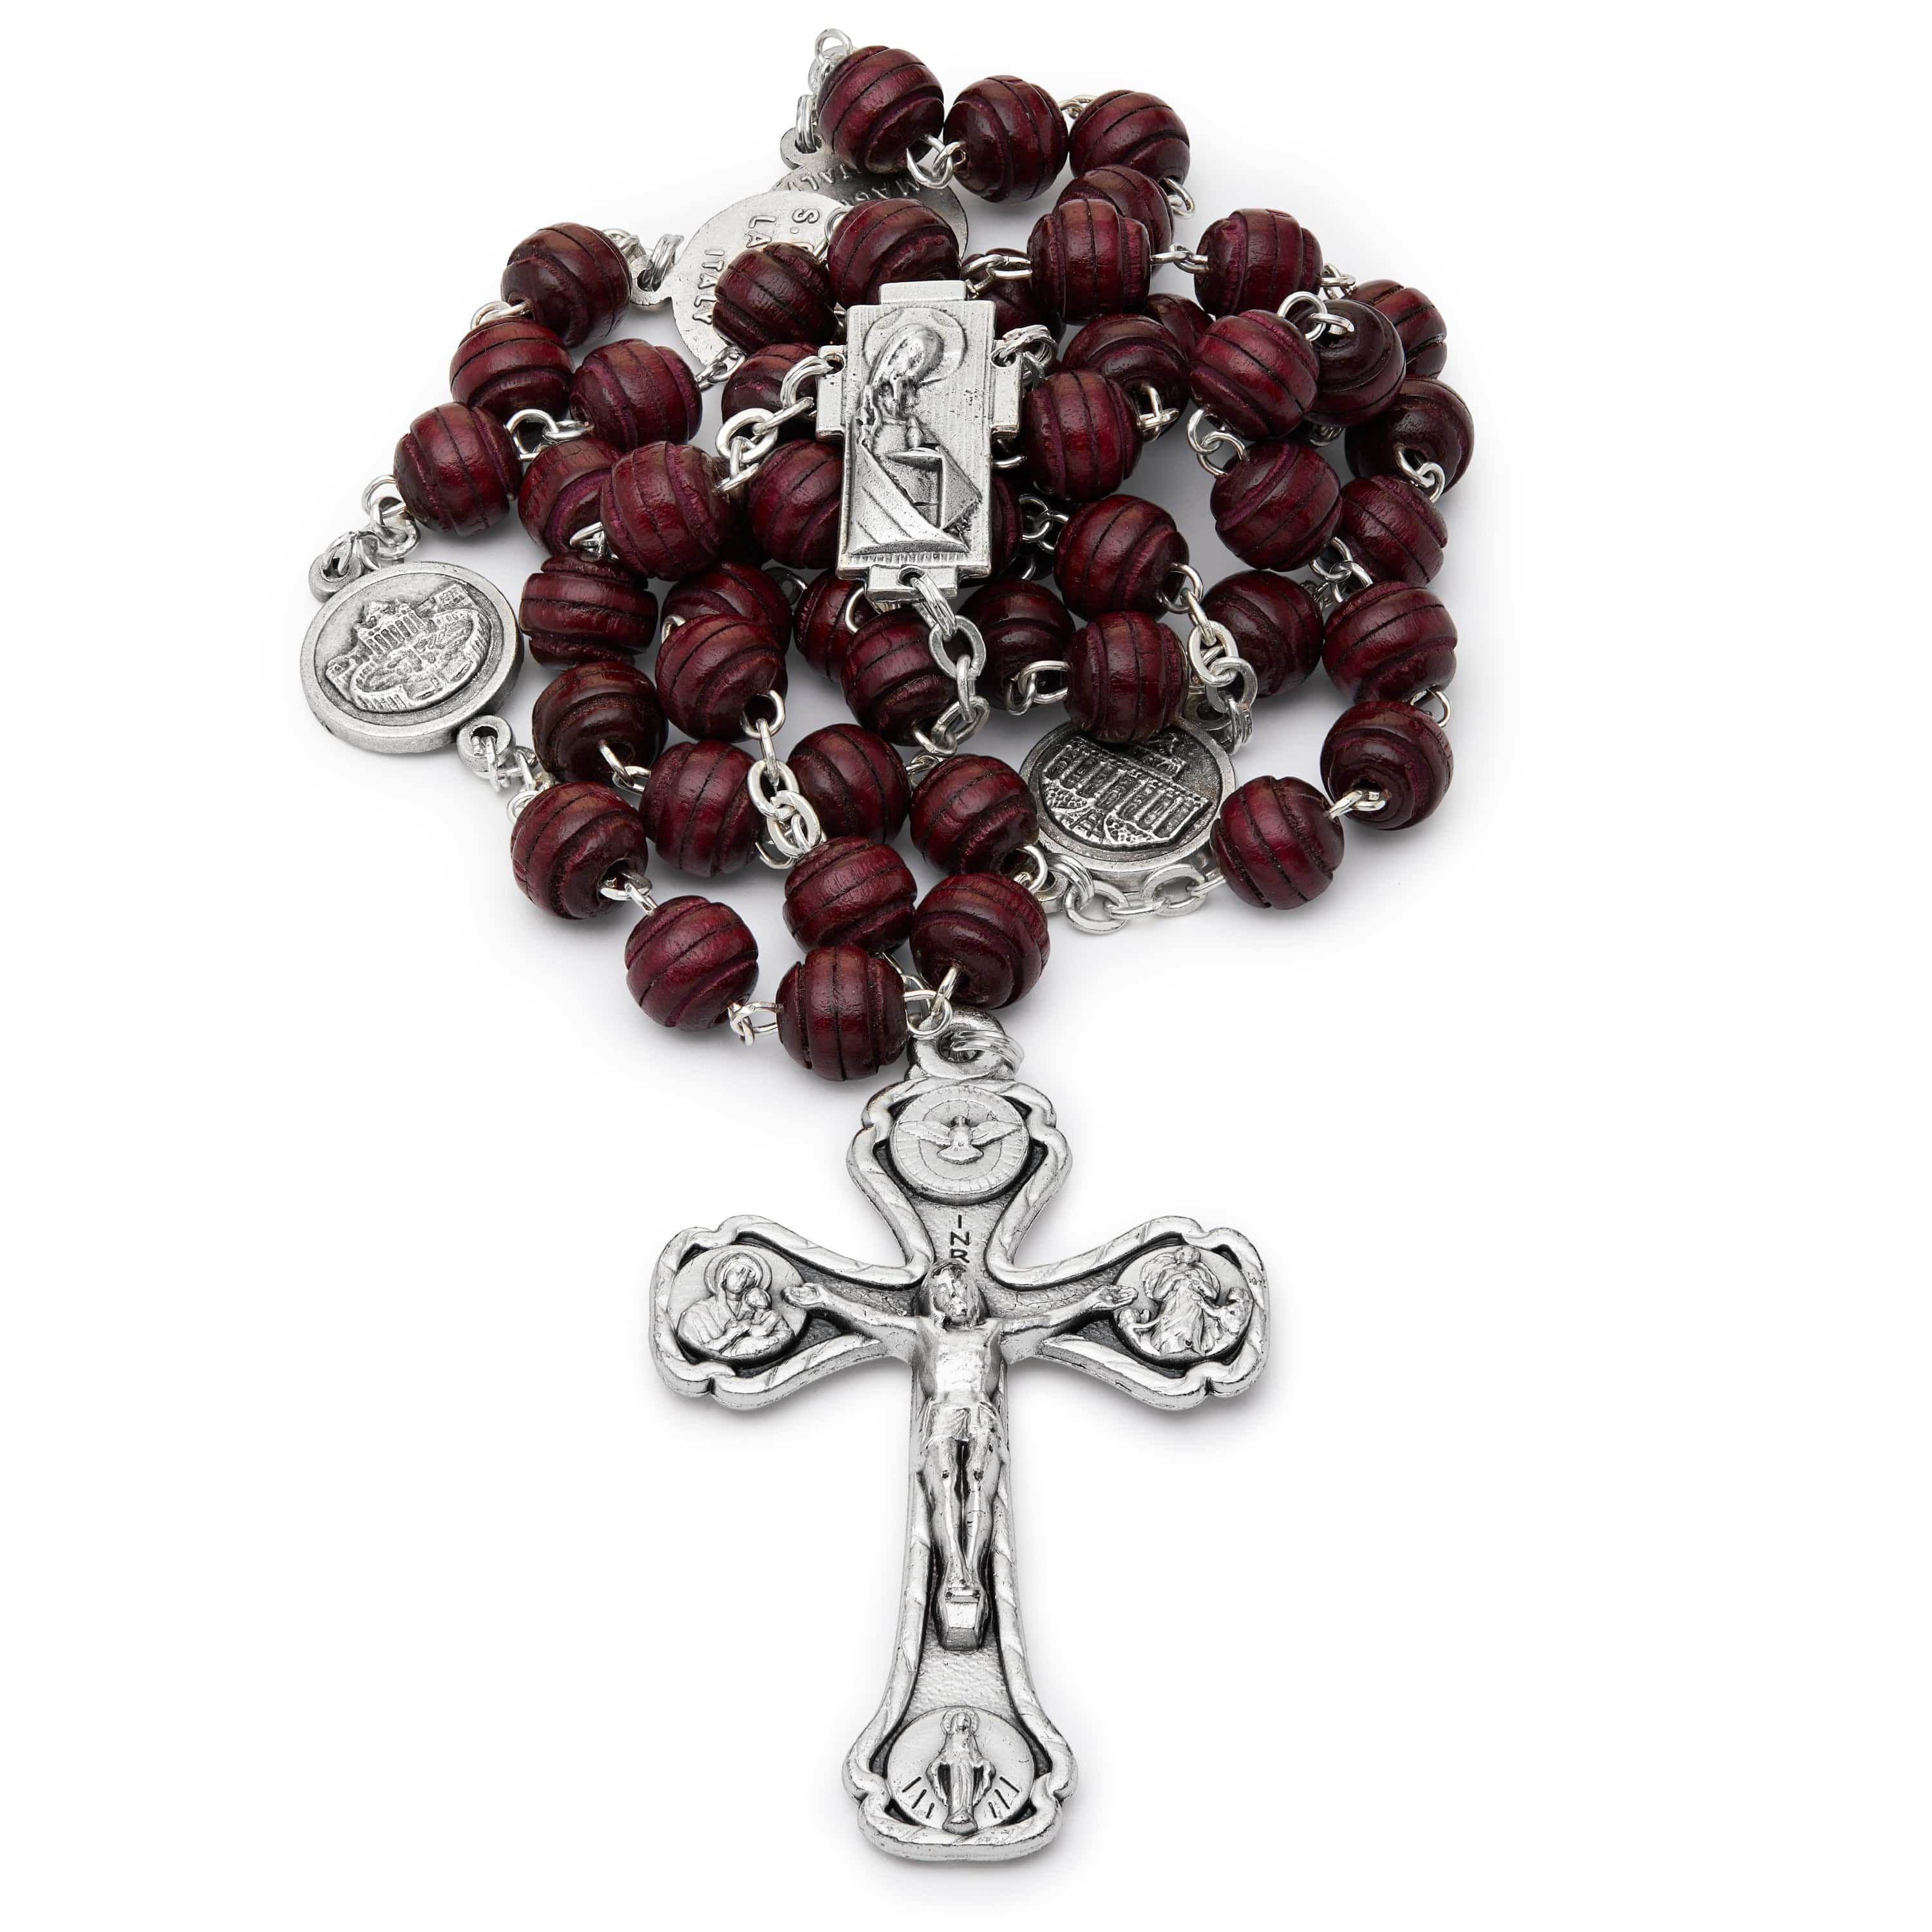 Round Wooden Rosary Beads with the Four Basilicas | MONDO CATTOLICO